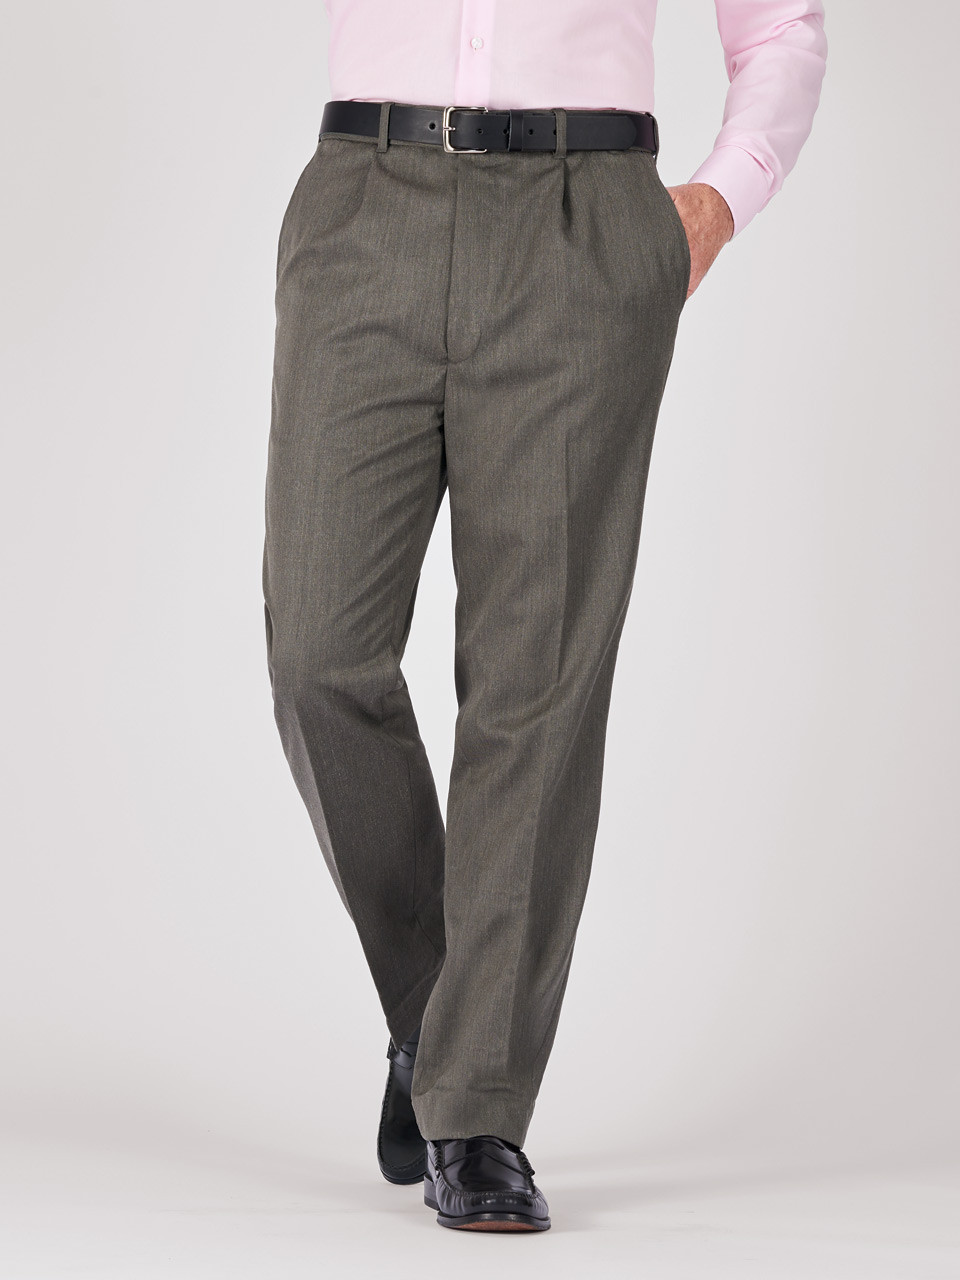 Mens Wool Trousers, Signature Woollen Trousers